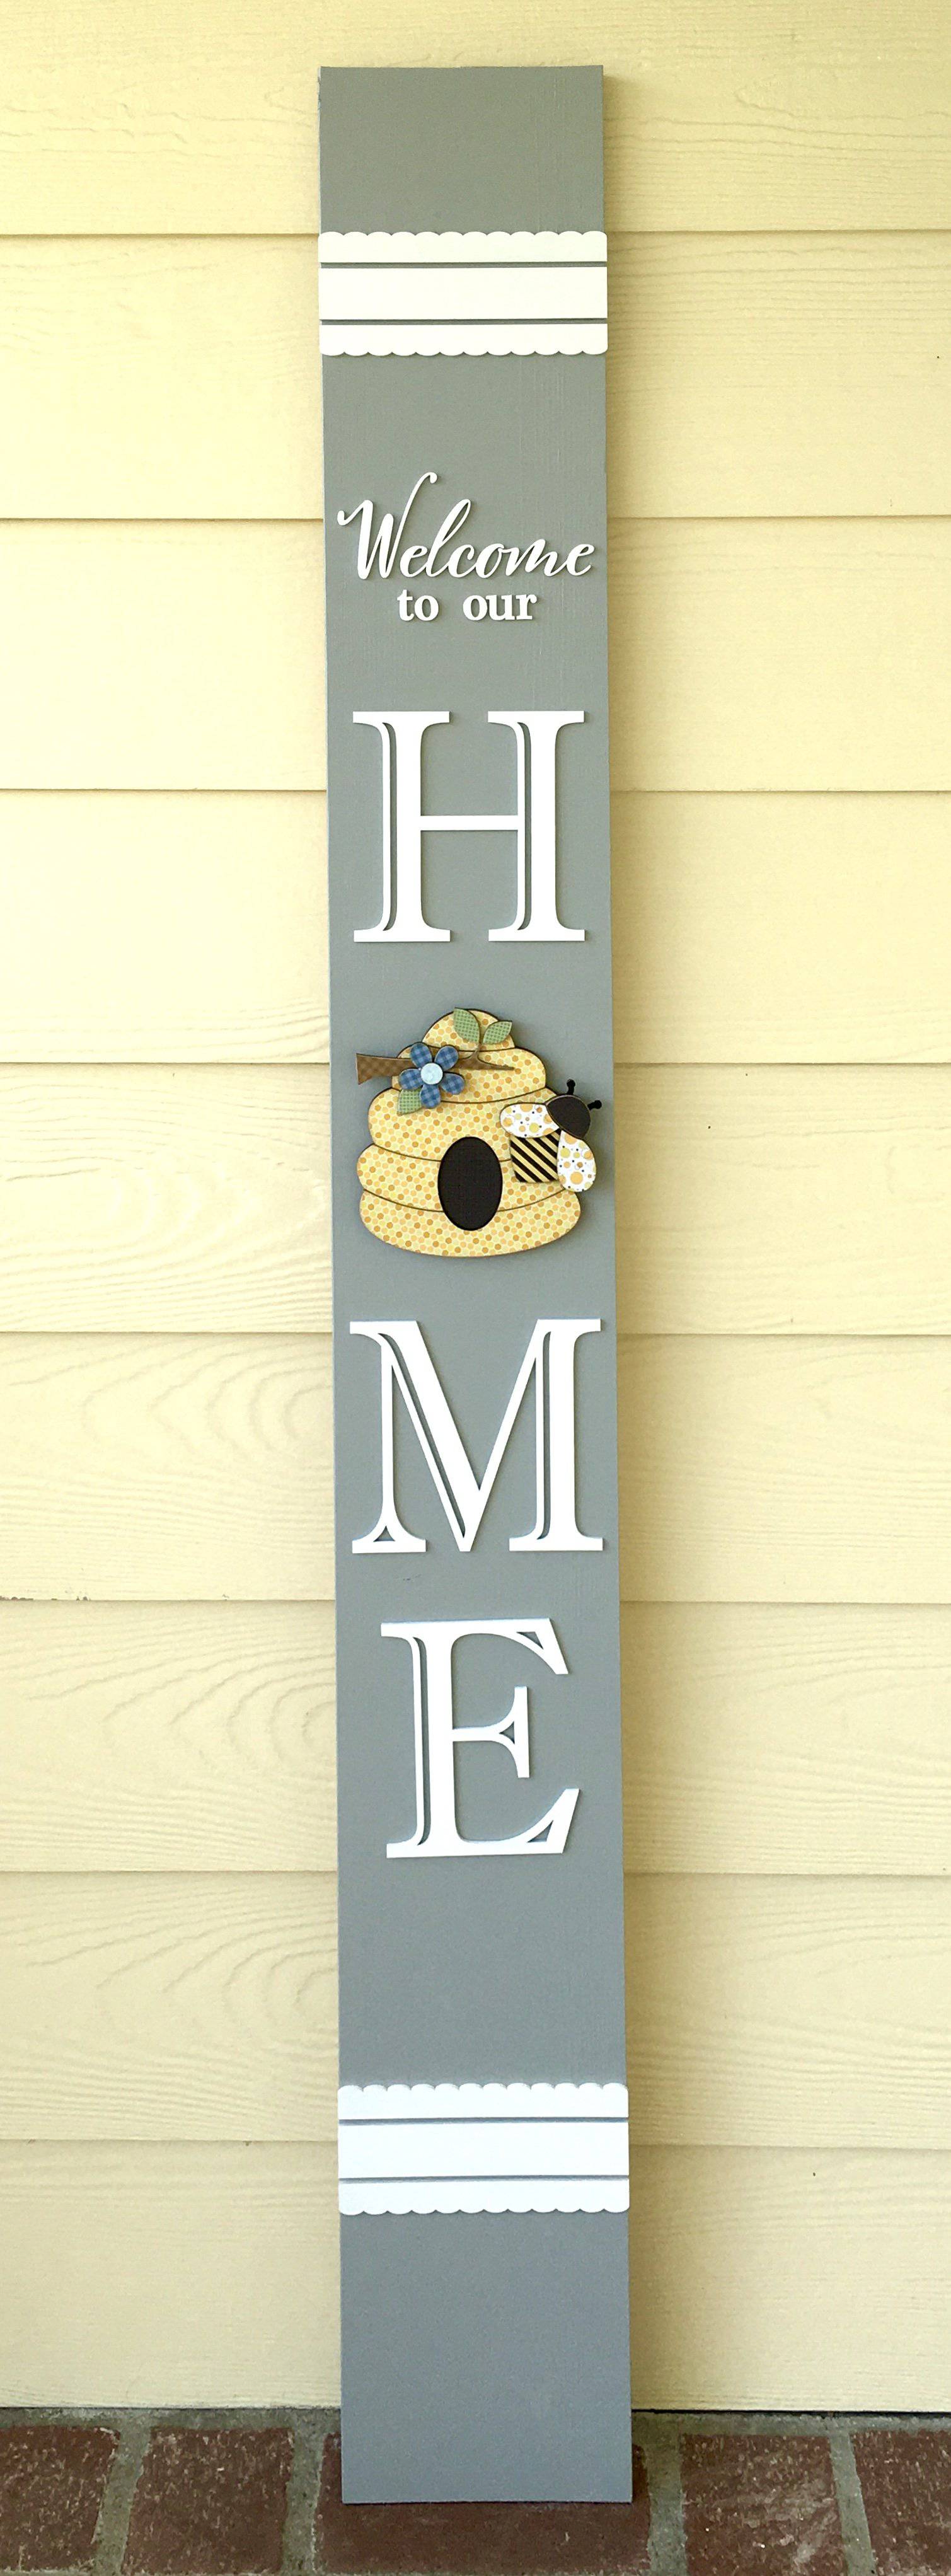 Tall seasonal porch welcome sign, changing seasonal porch welcome sign